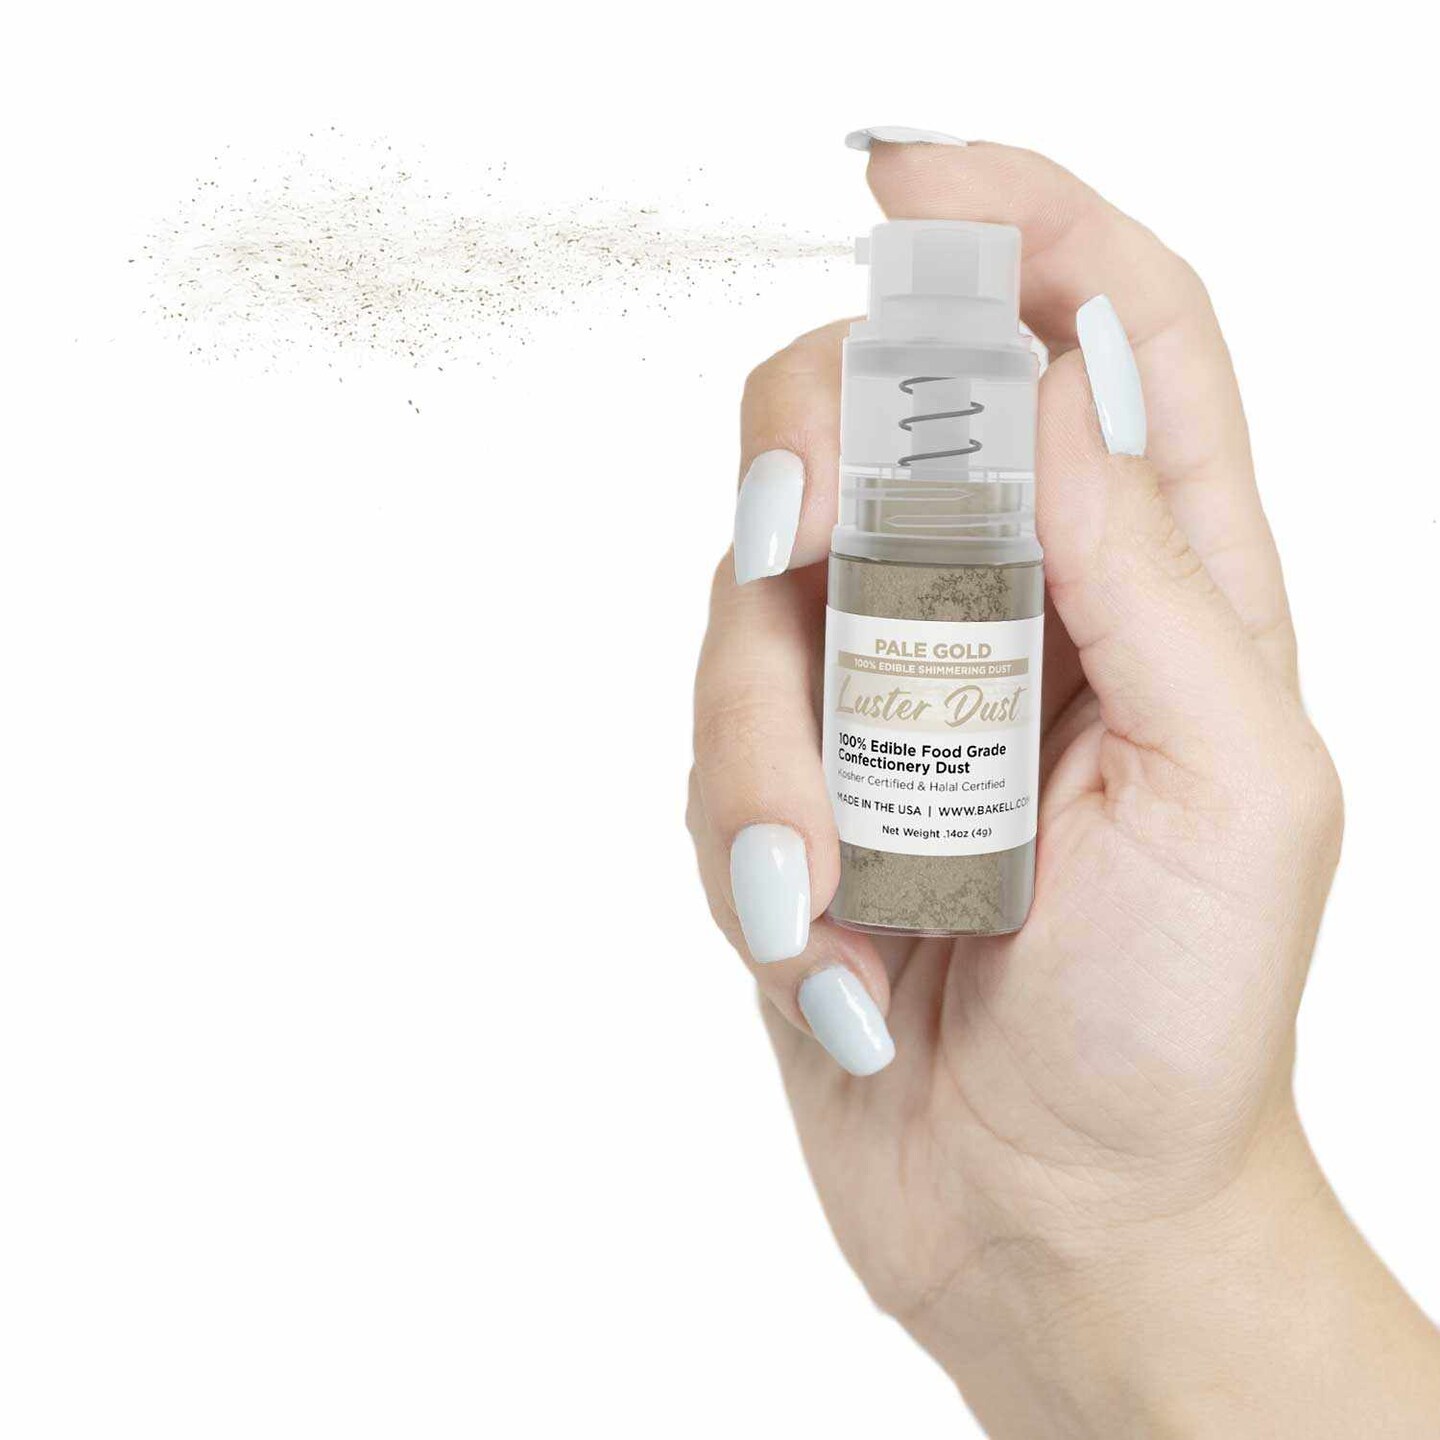 Pale Gold Luster Dust Spray | Luster Dust Edible Glitter Spray Dust for Cakes, Cookies, Desserts, Paint. FDA Compliant (4 Gram Pump)